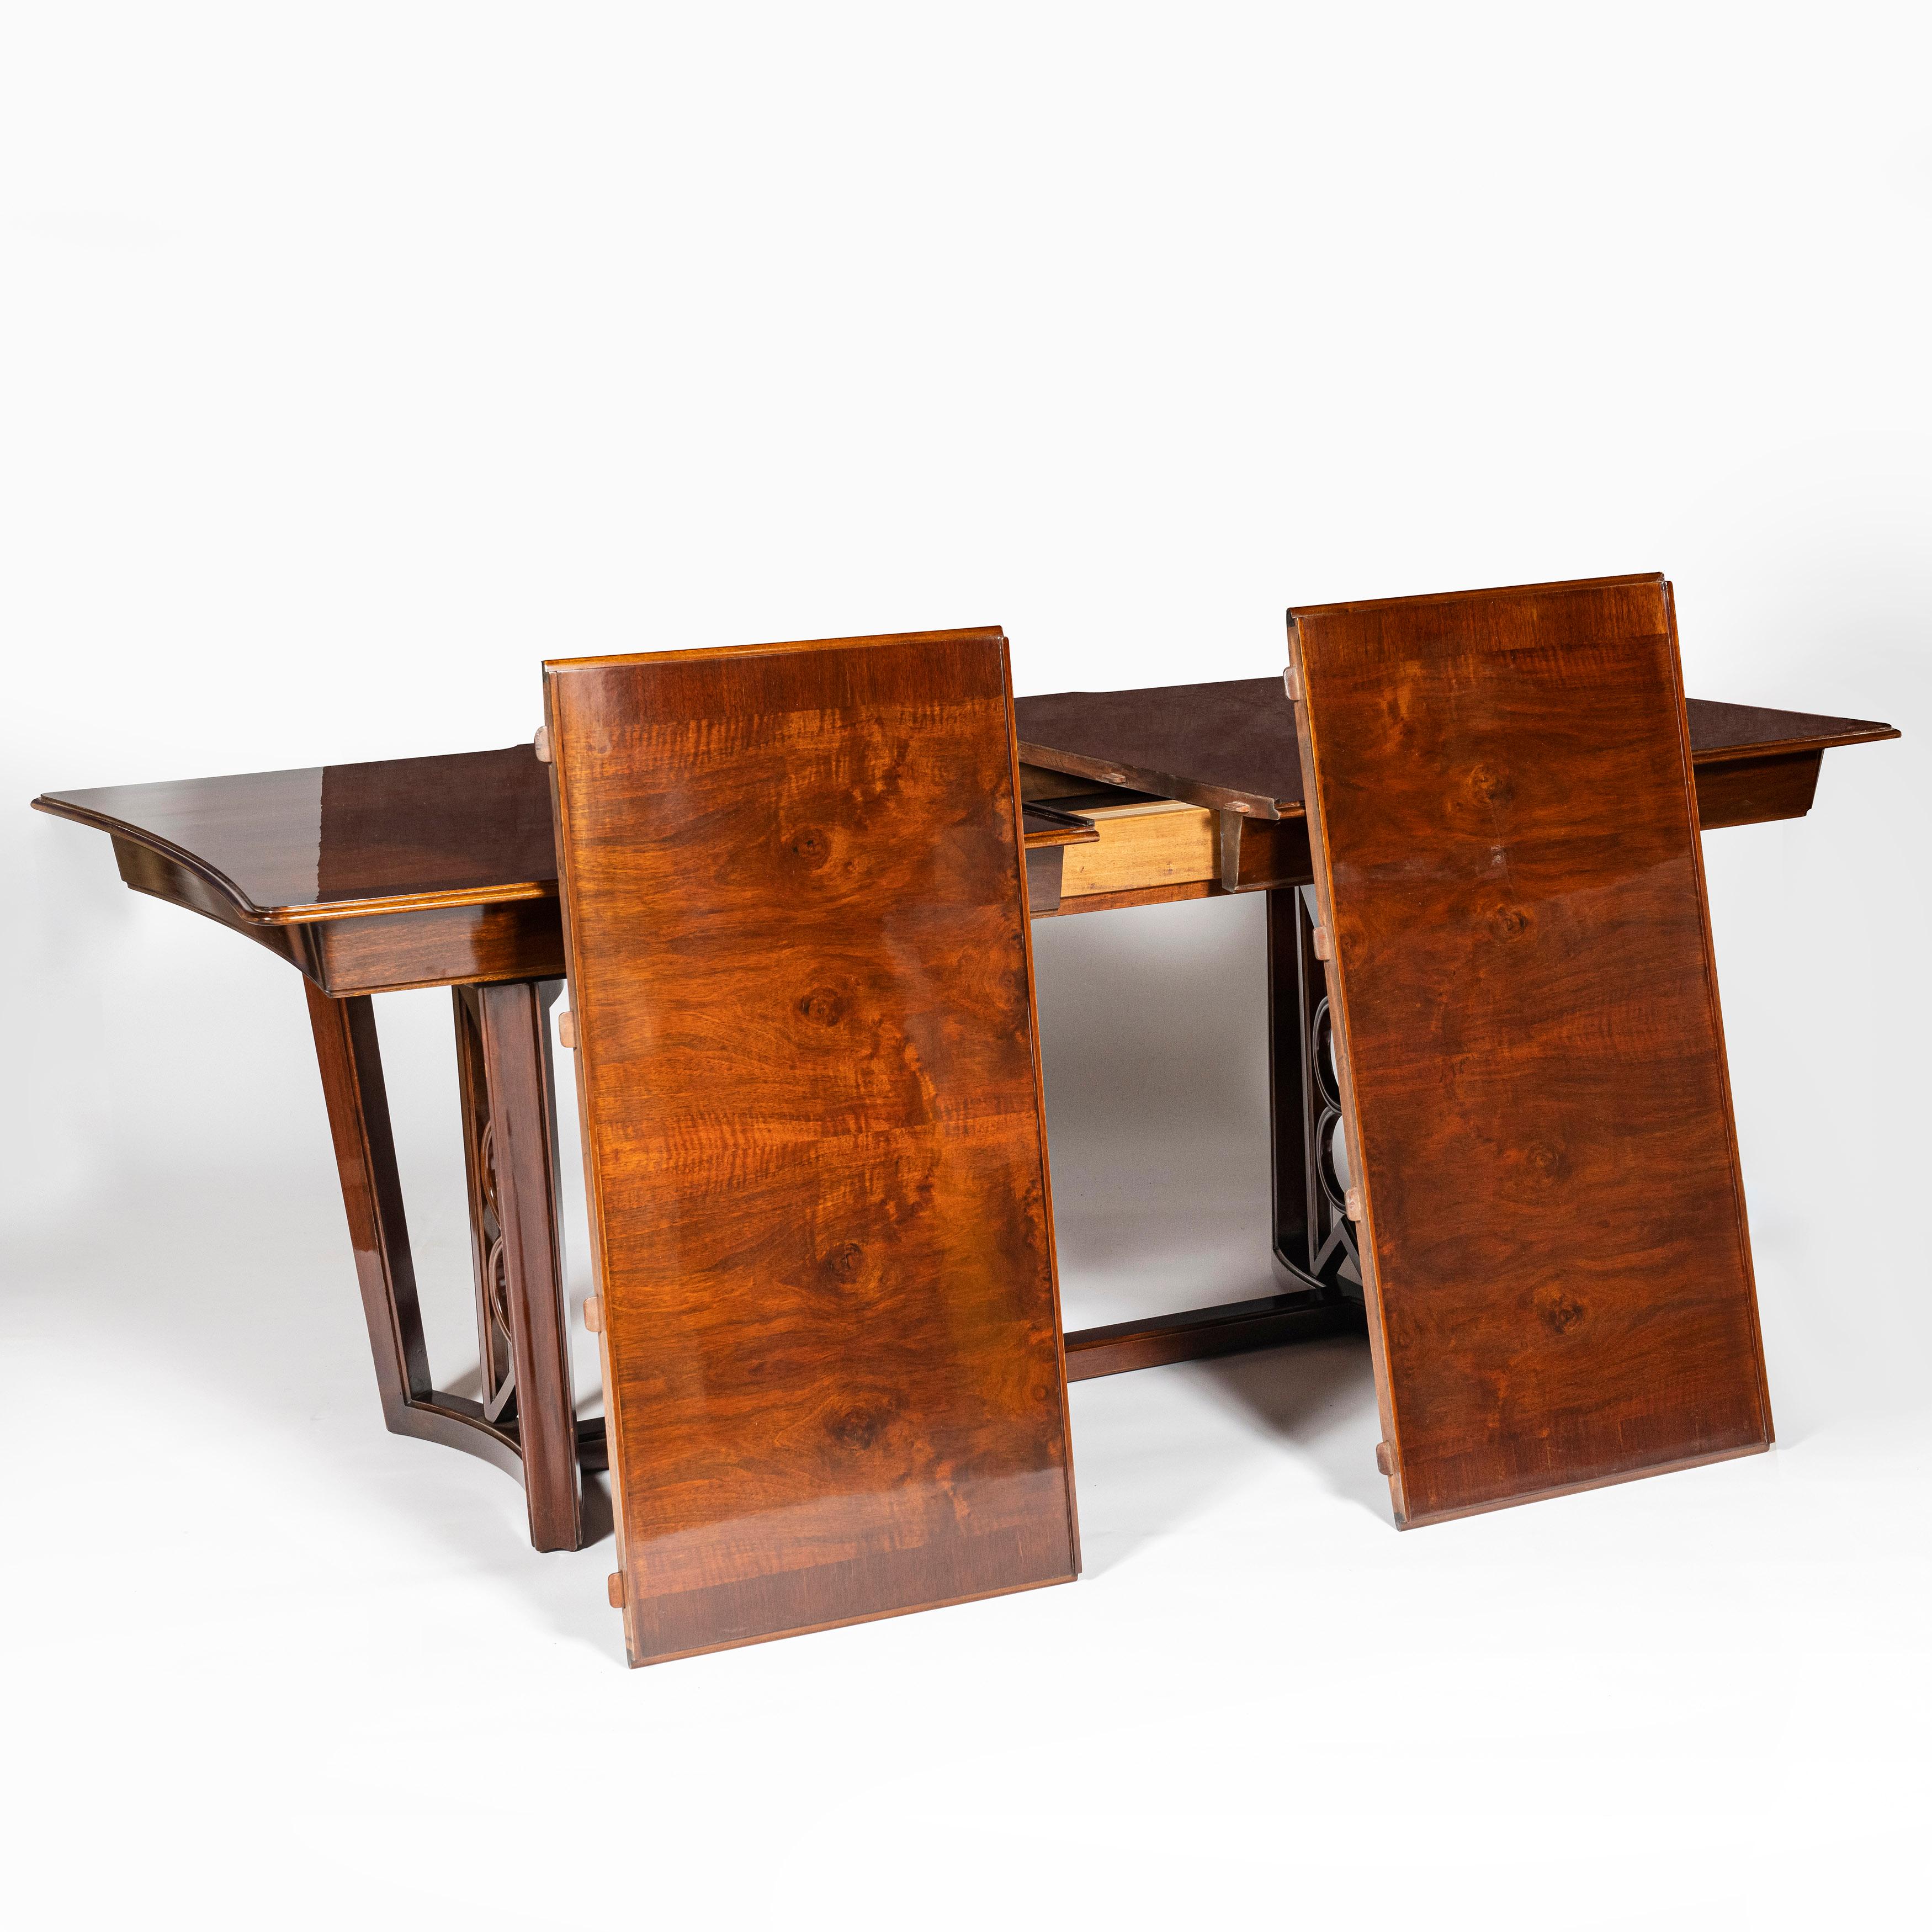 Mid-Century Modern Wood and Glass Dining Room Table by Englander & Bonta, Argentina, circa 1950 For Sale